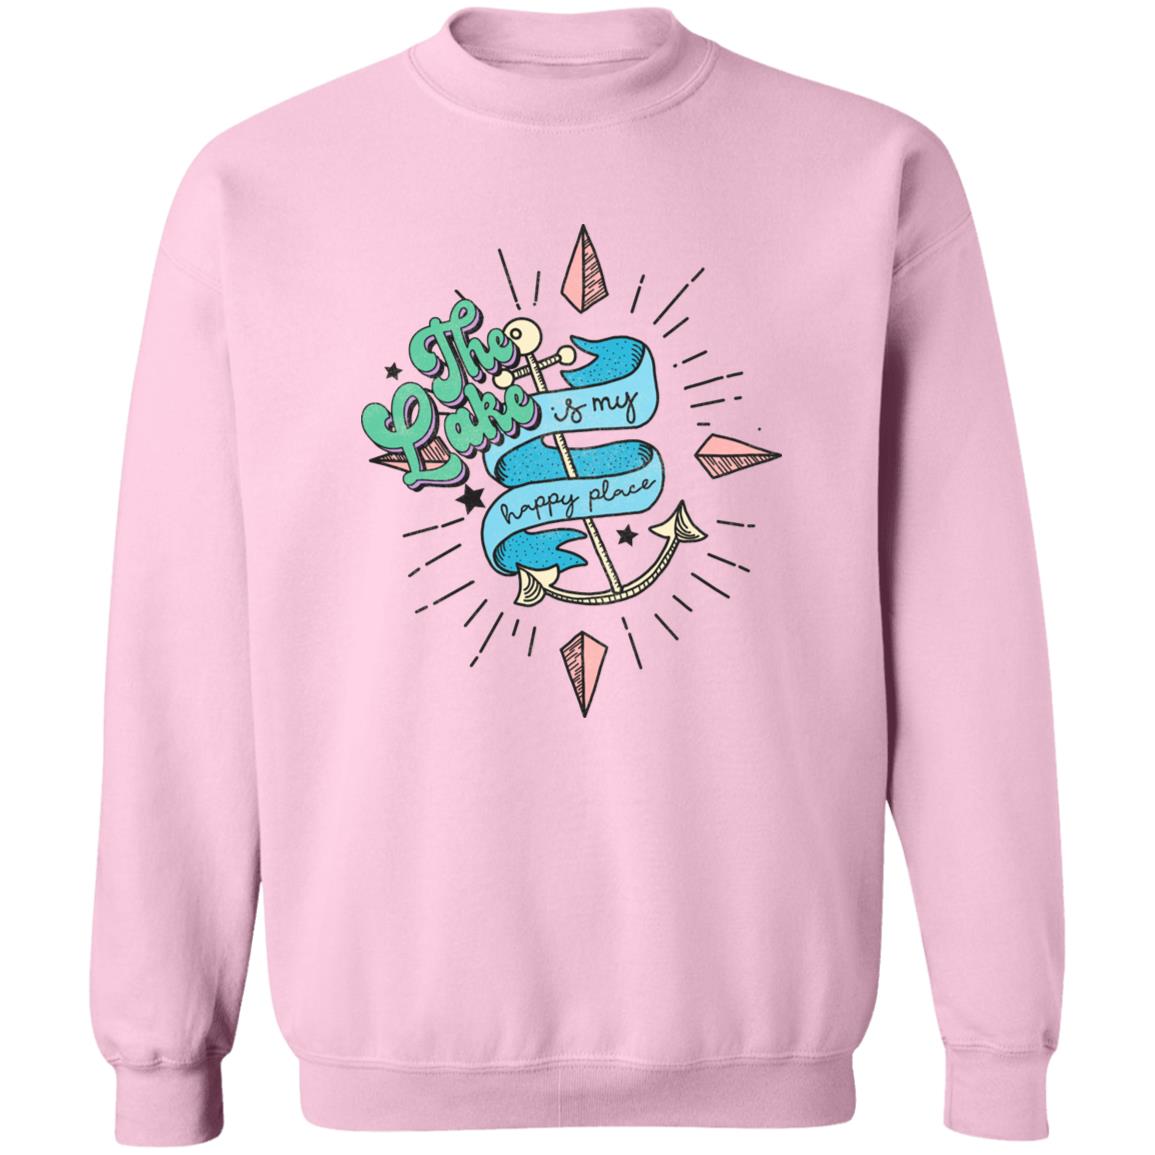 The Lake is My Happy Place HRCL LL 2 Sided G180 Crewneck Pullover Sweatshirt